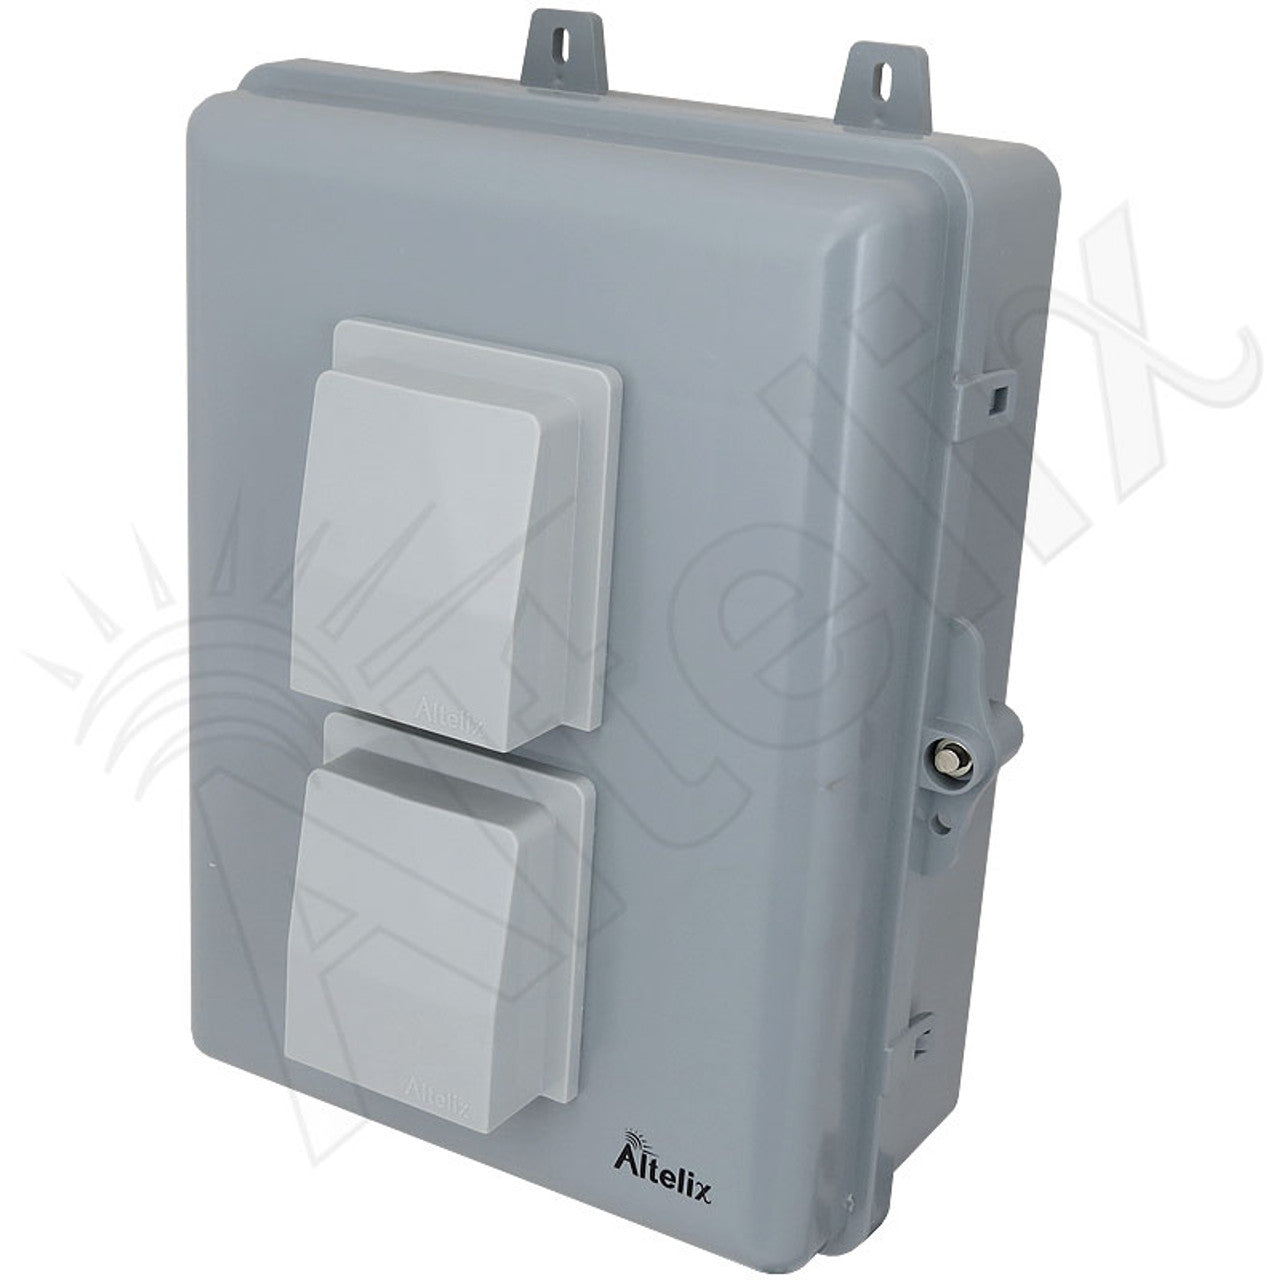 Altelix Weatherproof Vented WiFi Enclosure for Amazon eero® 6 and eero® 6 Extender with 120VAC Outlet and Power Cord